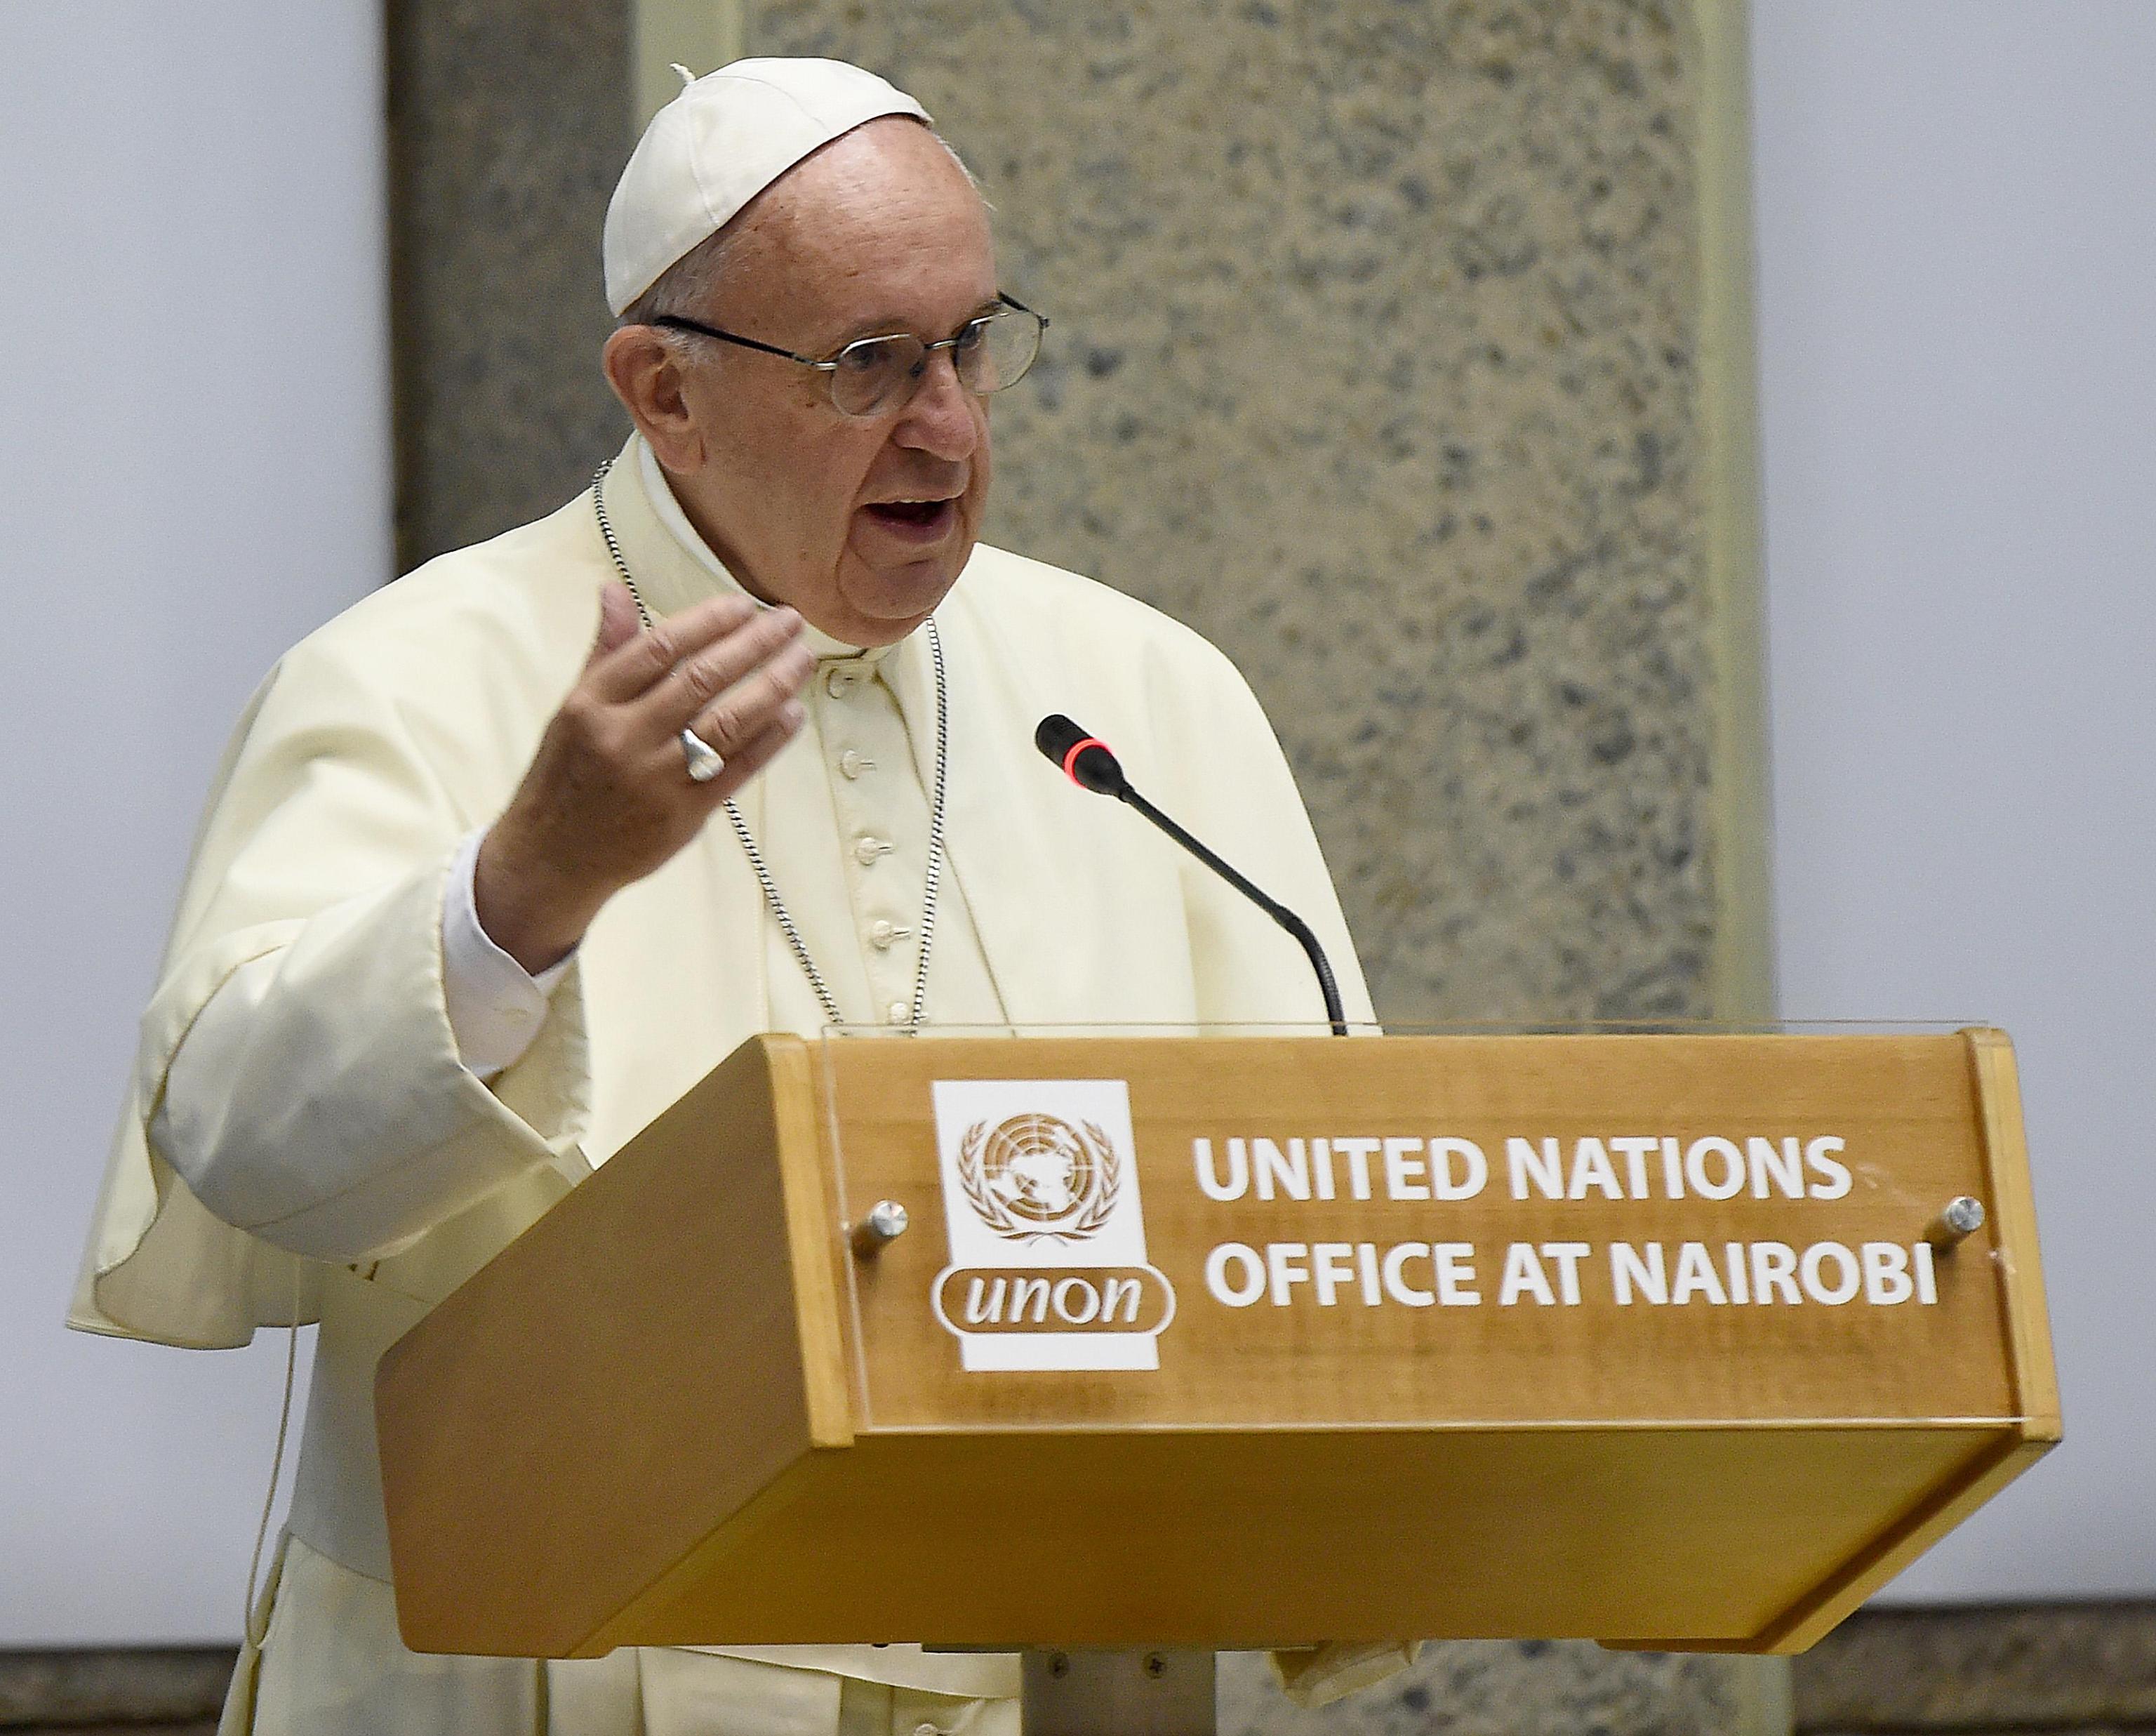 Pope Francis adresses a speech during a visit to the United Nations Office in Nairobi (UNON)